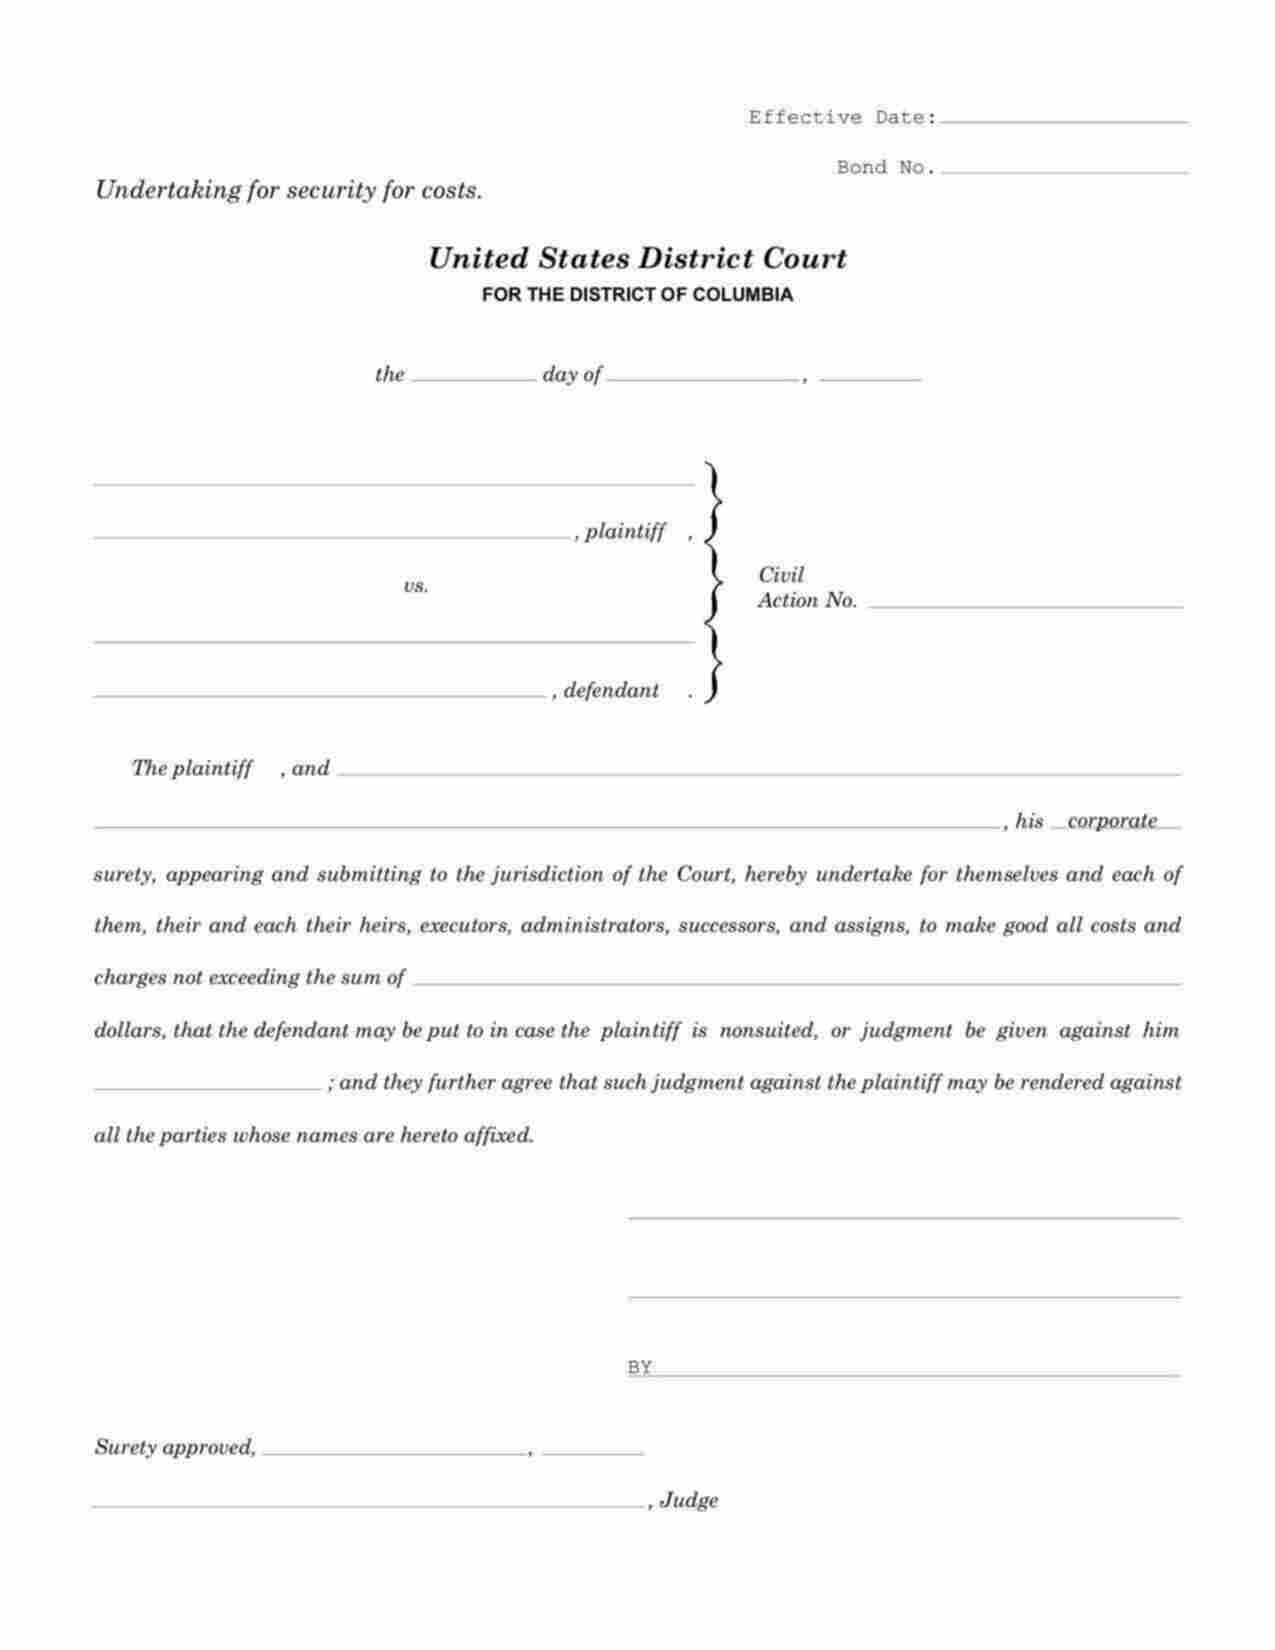 District of Columbia Undertaking for Security for Costs Bond Form